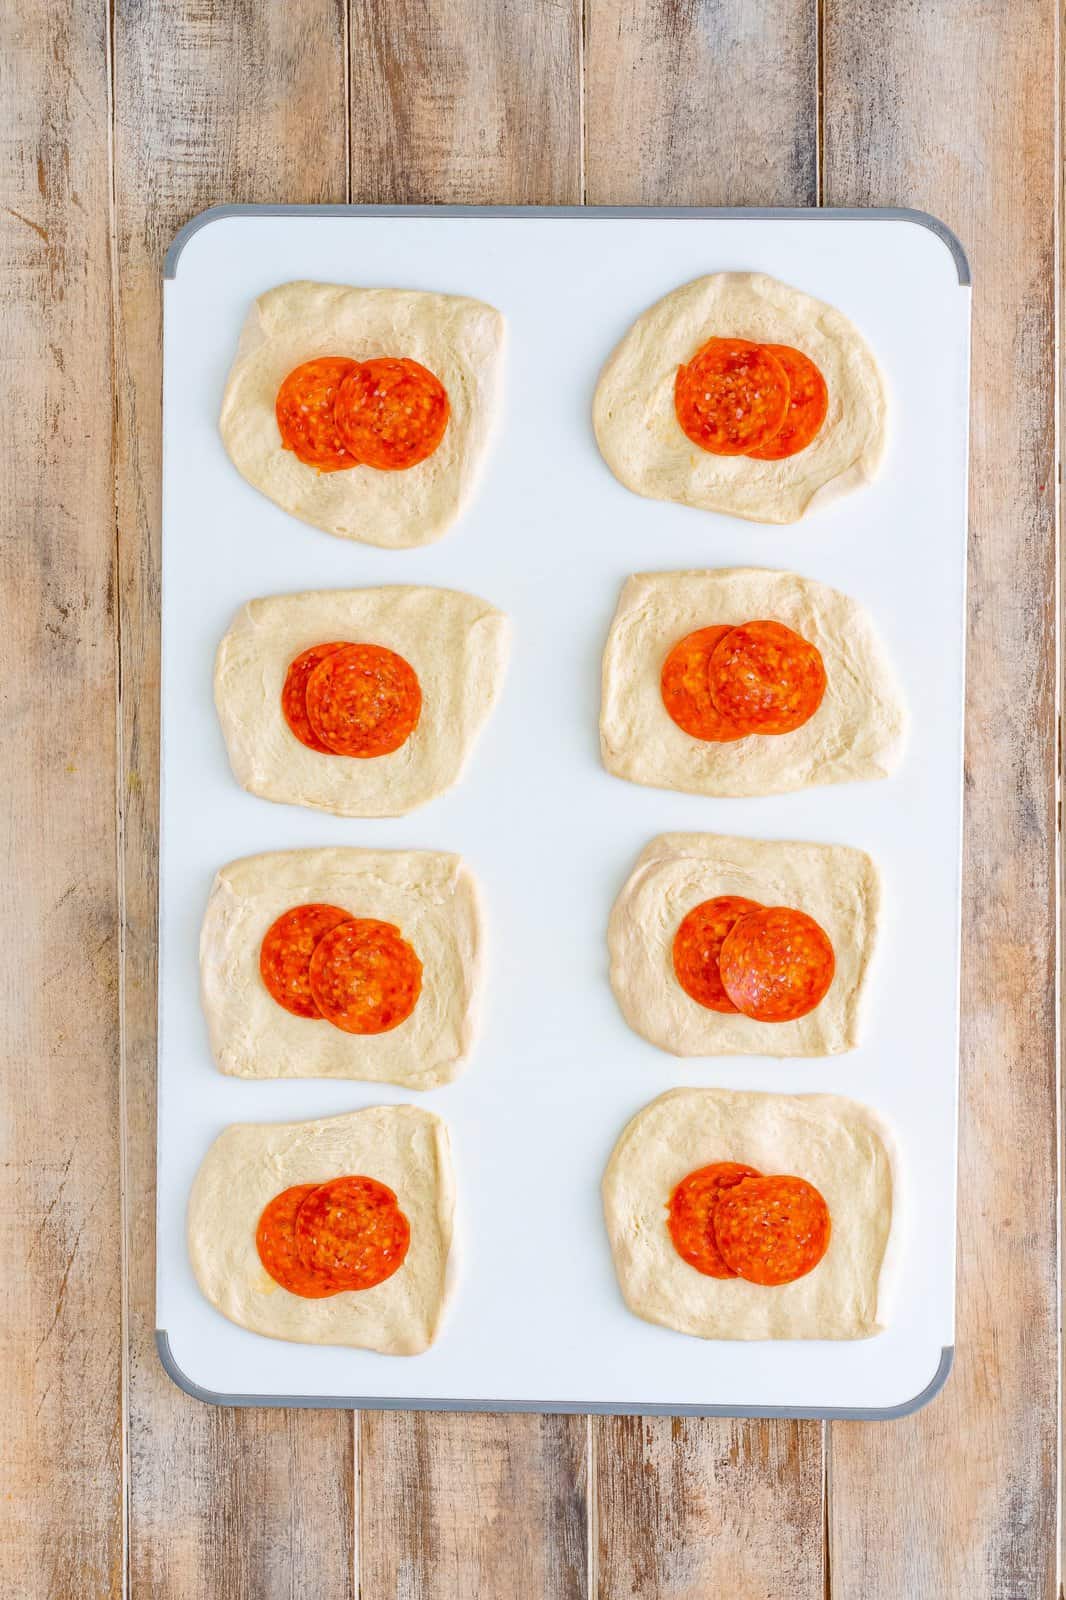 Flattened bread dough with pepperoni slices.